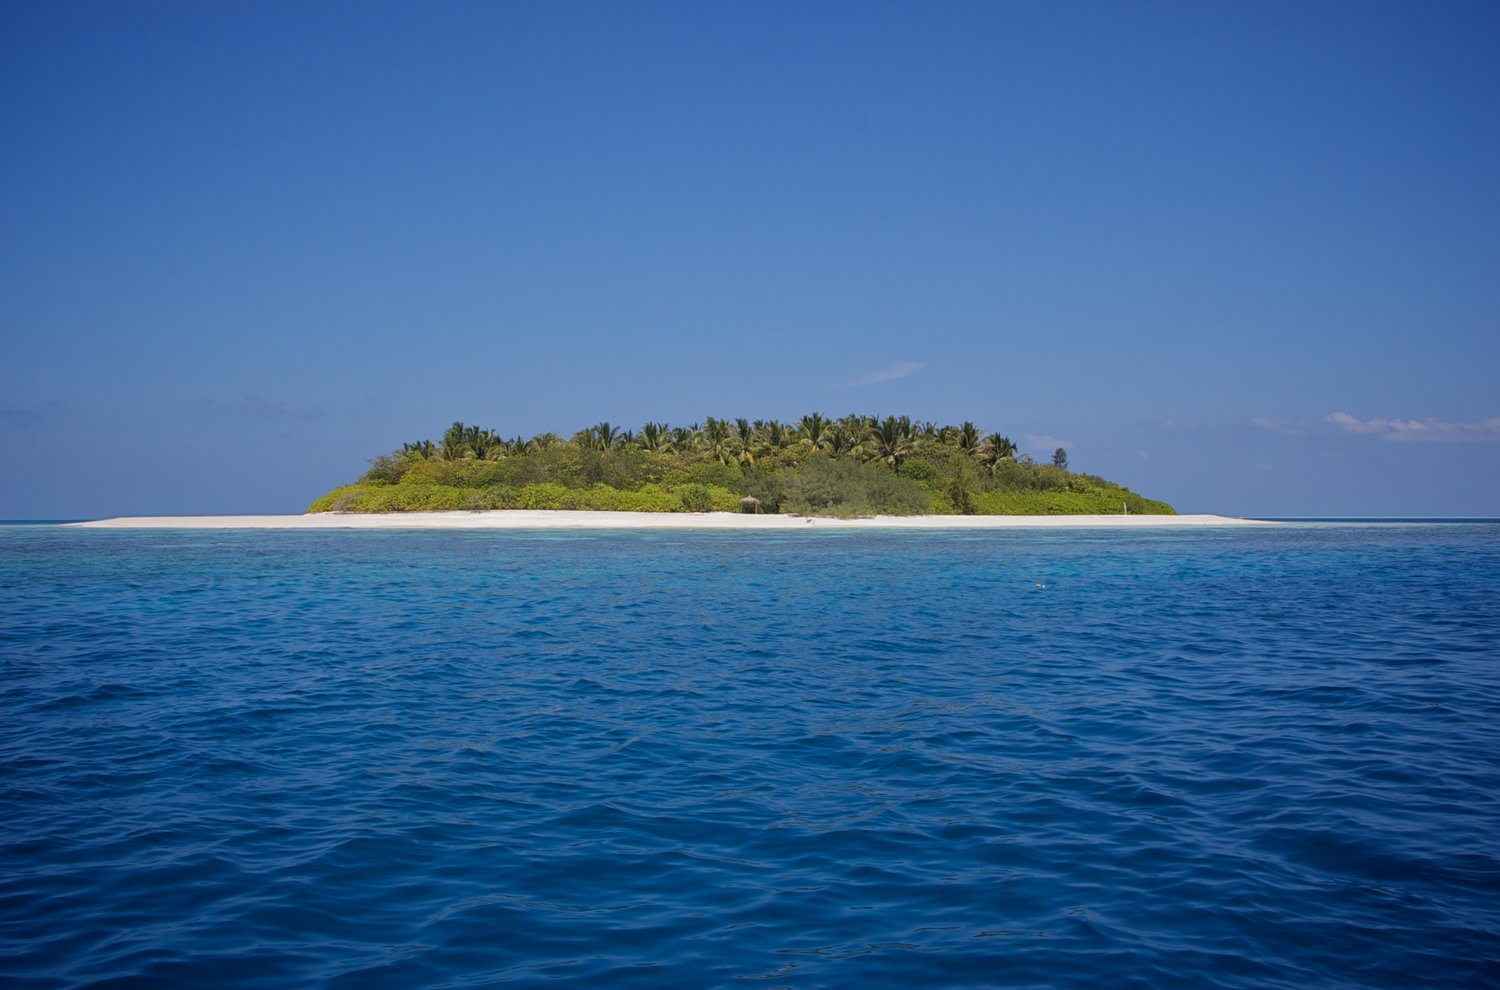 You find yourself as the sole survivor on a deserted island. 